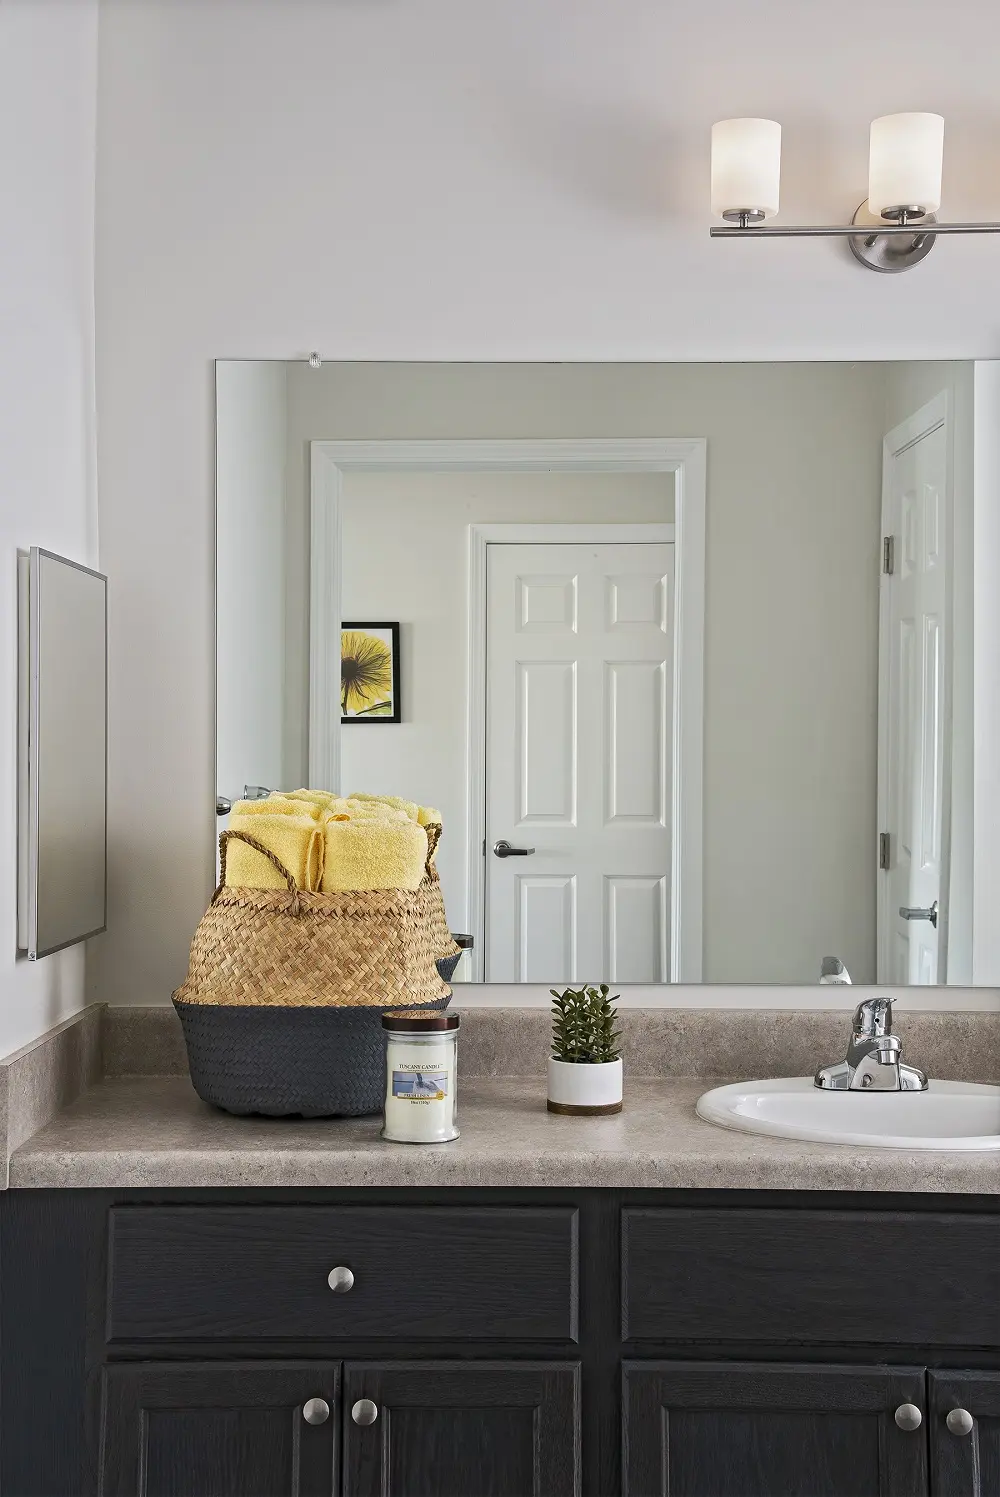 Bathroom of a senior apartment at American House East I Villas, an Independent senior living community in Roseville, Michigan